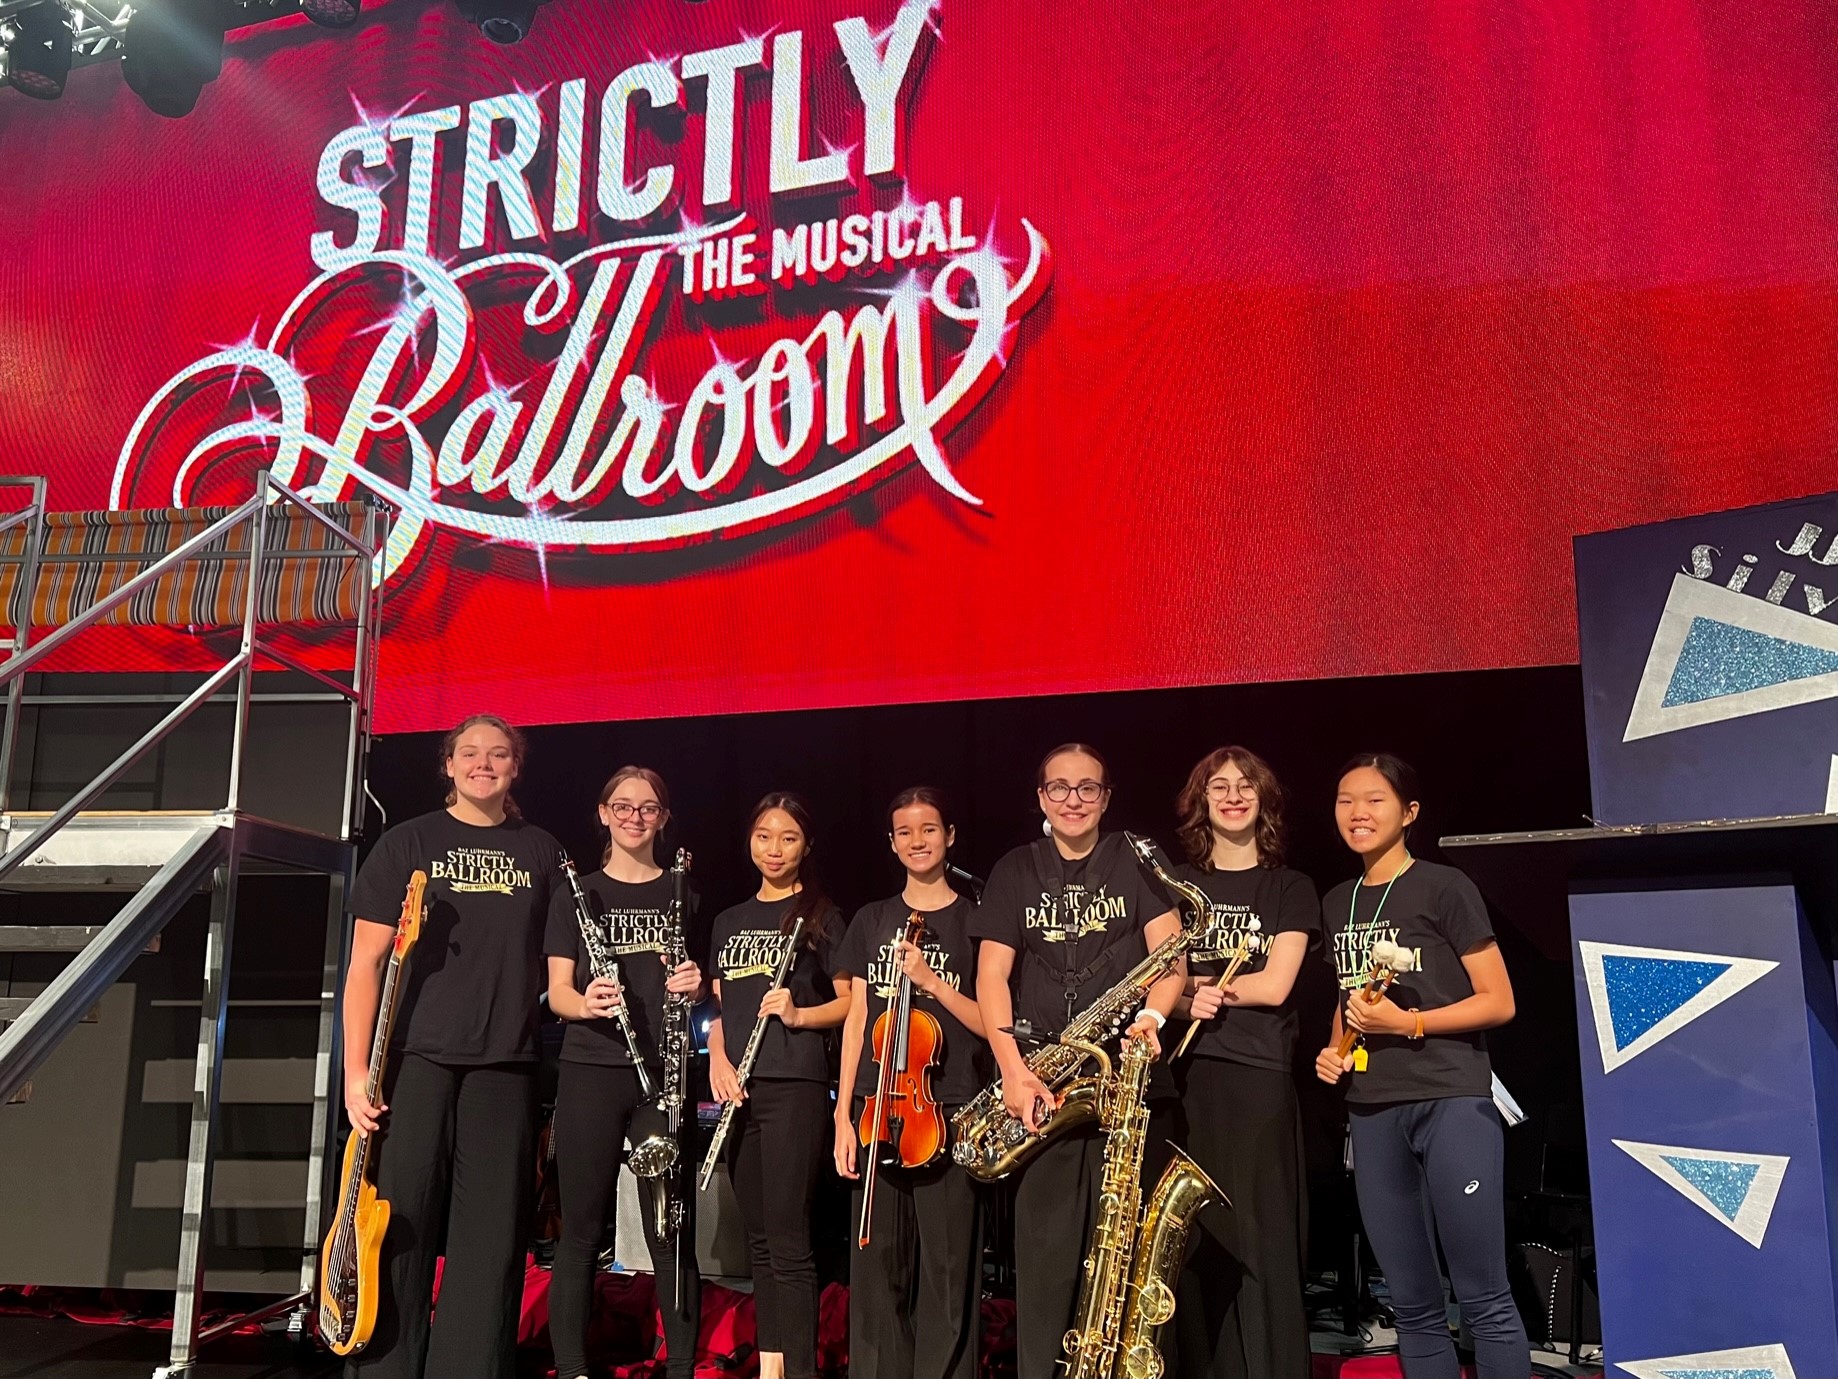 StM_Strictly Ballroom the Musical4